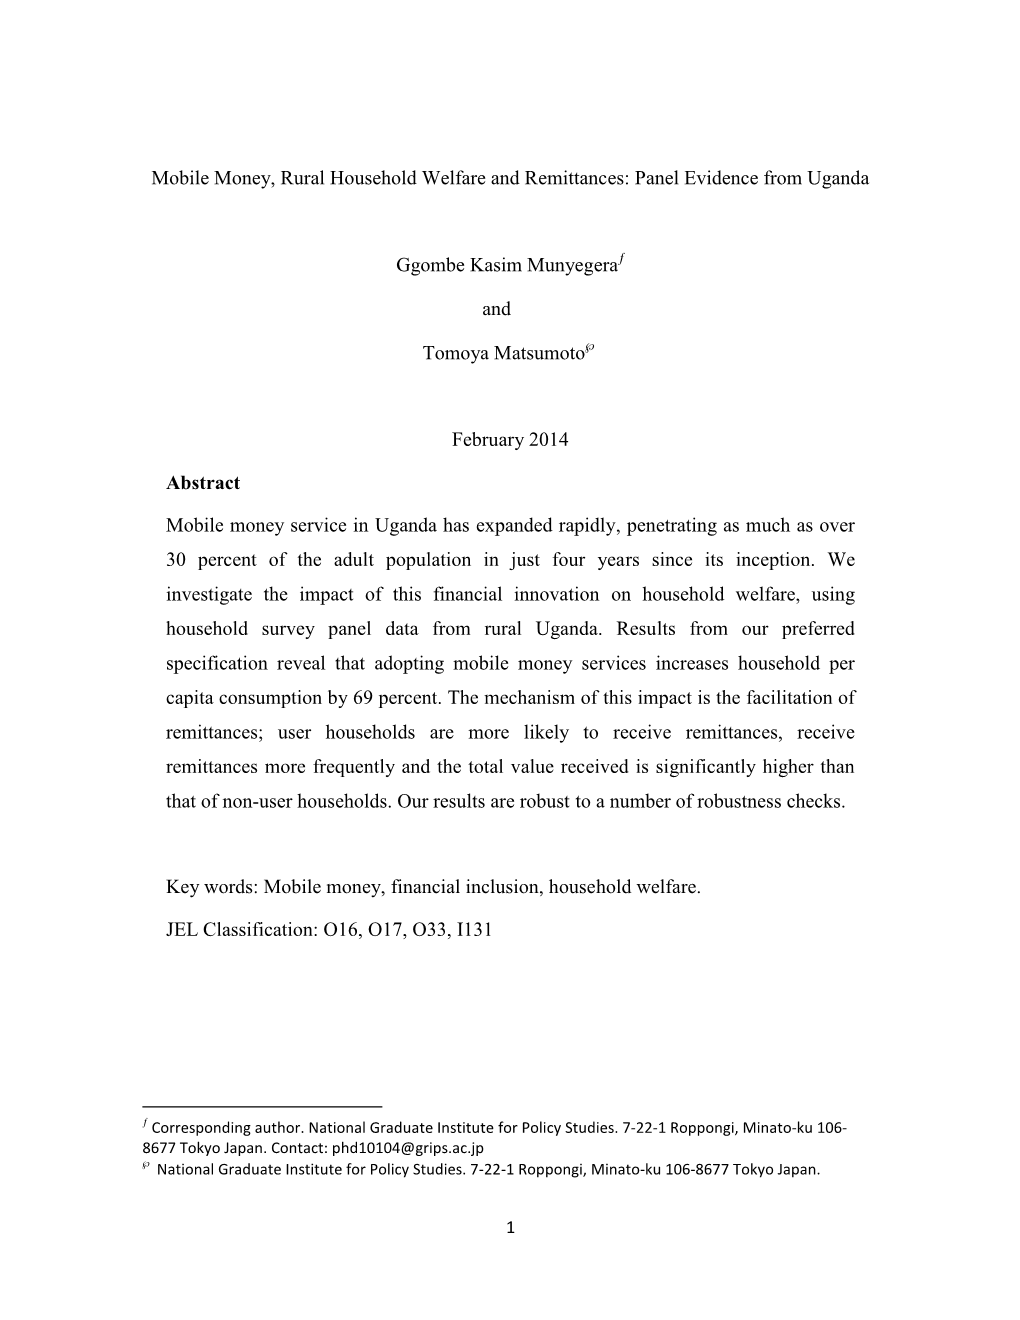 Mobile Money, Rural Household Welfare and Remittances: Panel Evidence from Uganda